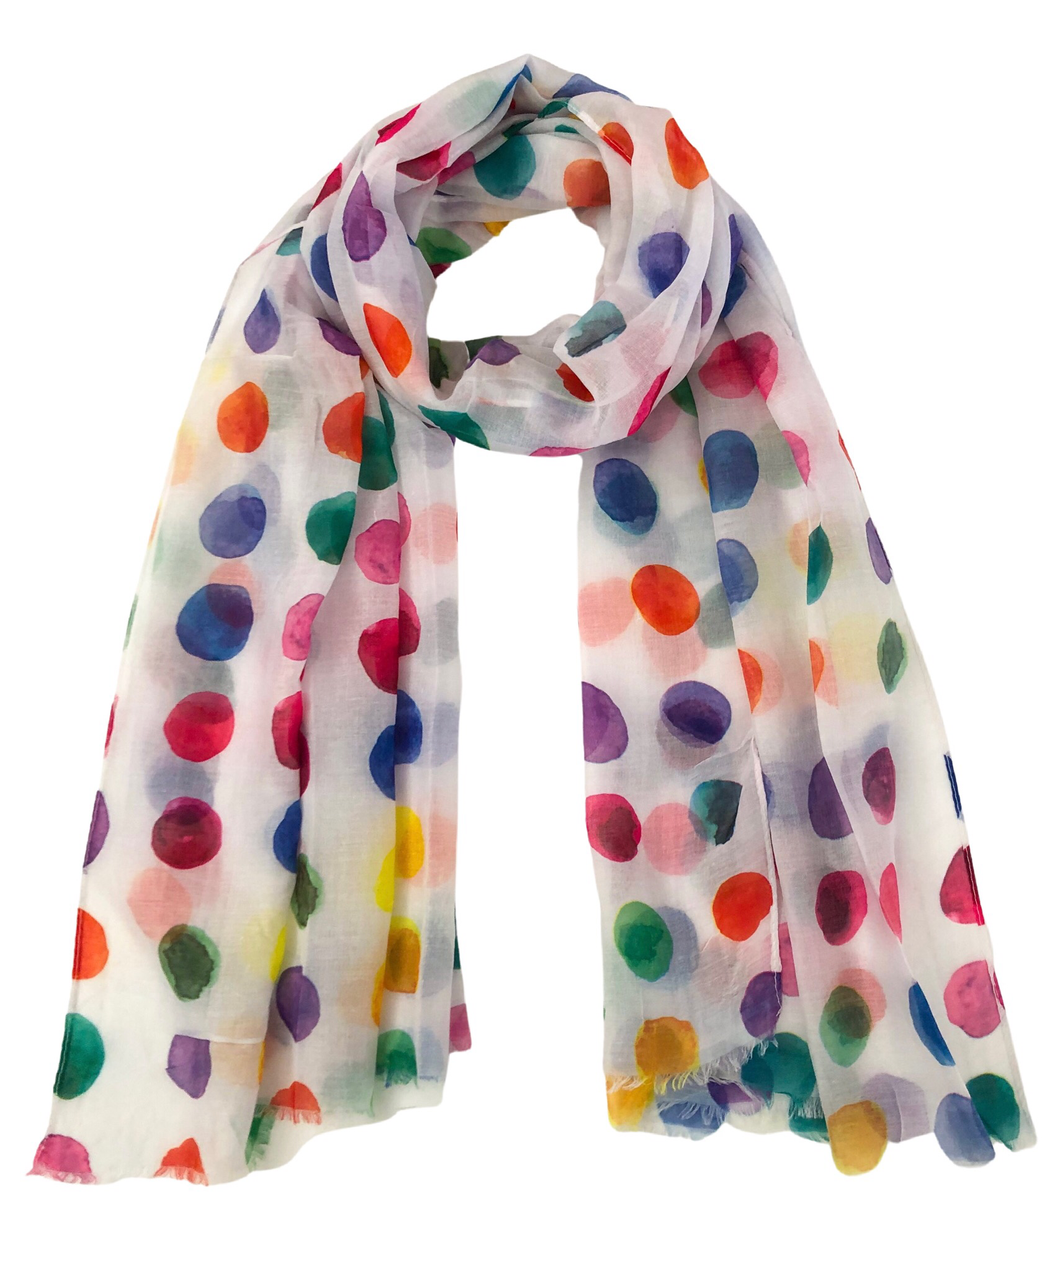 Scarf - Long with Frayed Edges - Multi-Colourful Polka Dots on White